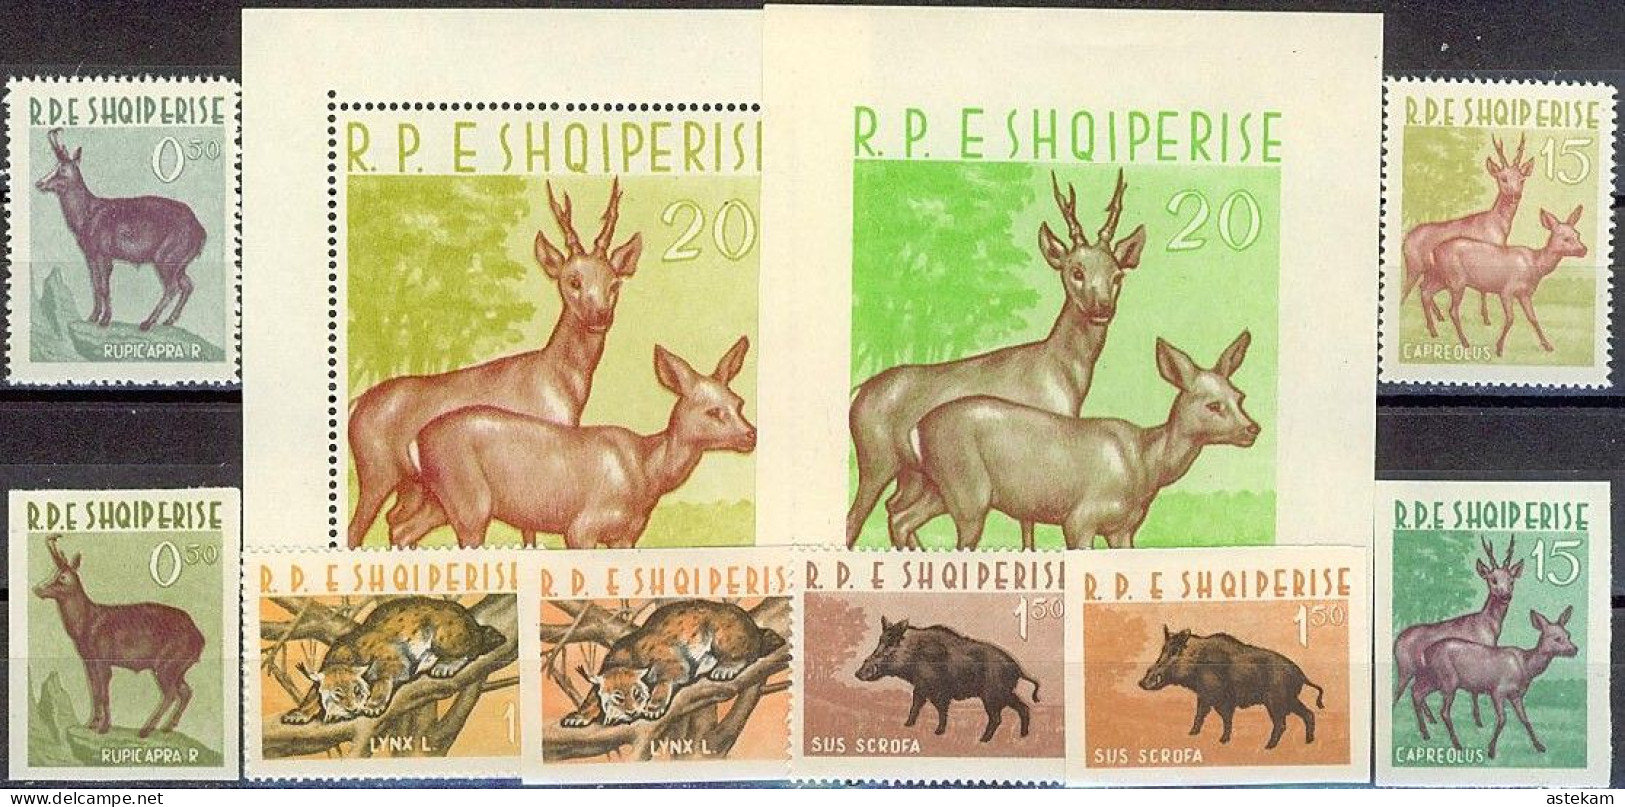 ALBANIA 1962, ANIMALS, TWO COMPLETE, MNH PERFORATE And IMPERFORATE SERIES+2 BLOCKS With GOOD QUALITY, *** - Albania